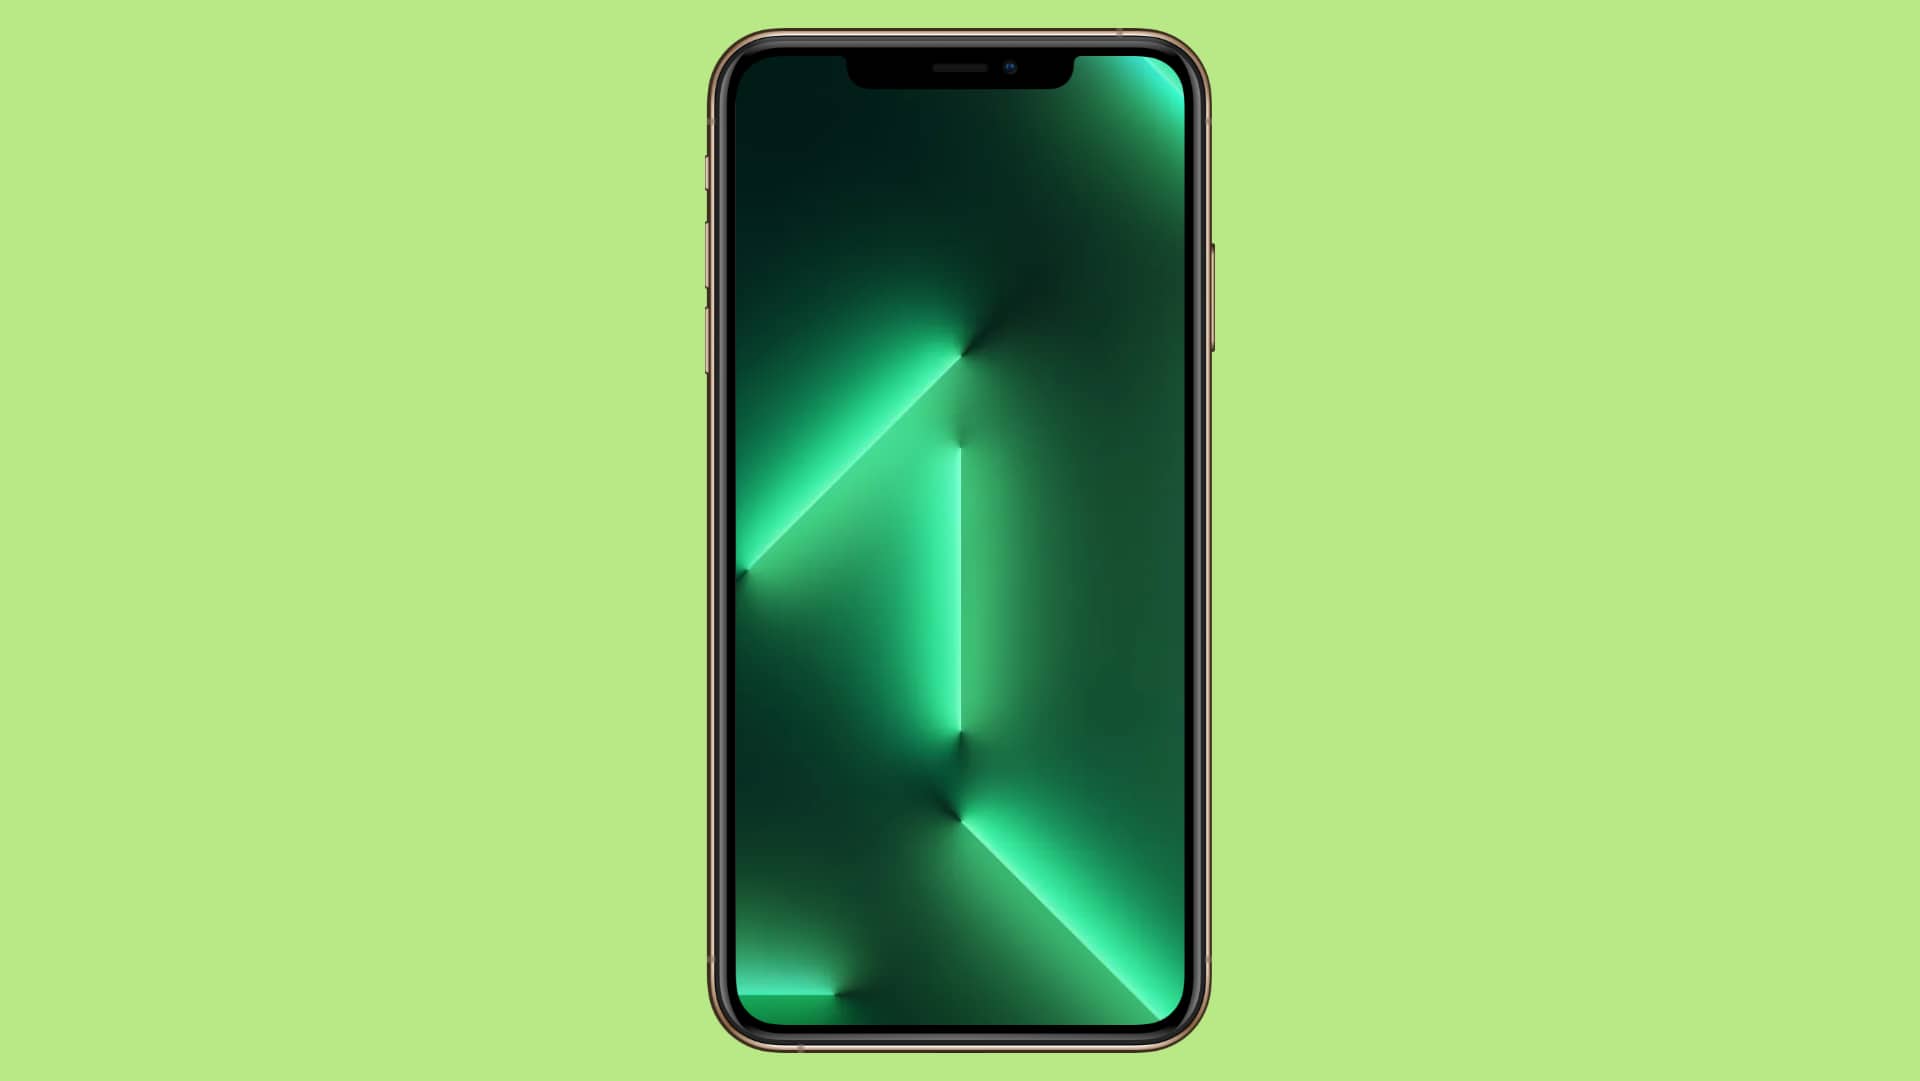 New Green iPhone Pro Wallpaper Available For